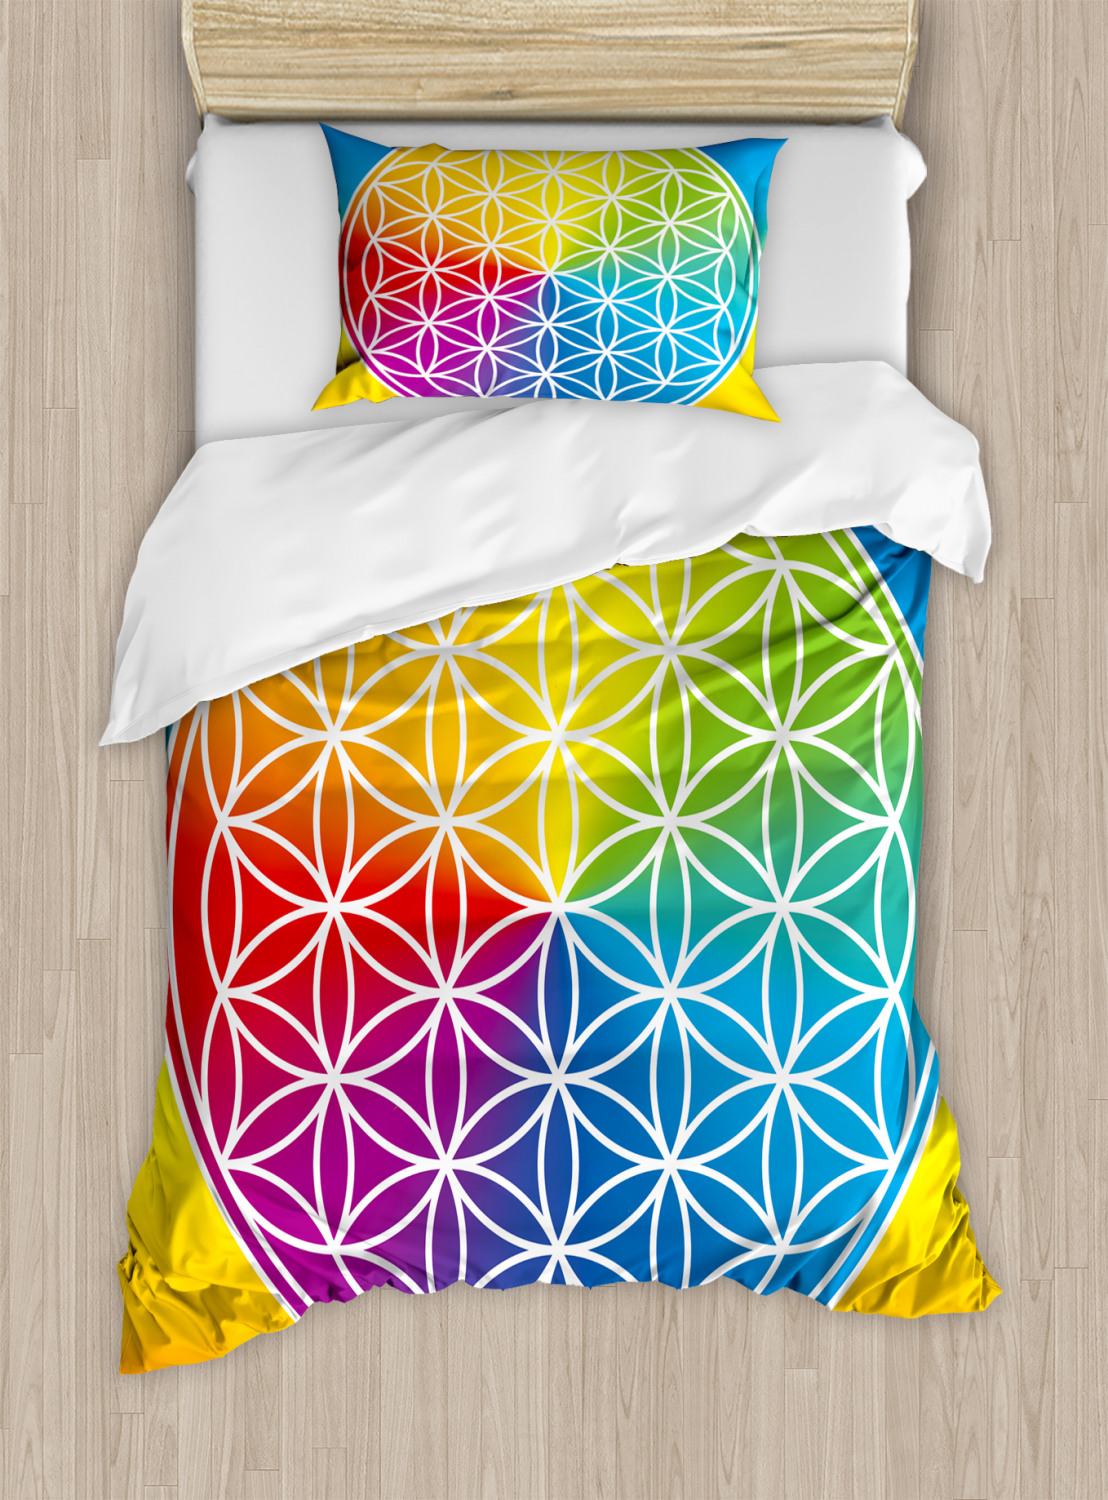 Home Furniture Diy Flower Of Life Duvet Cover Set Twin Queen